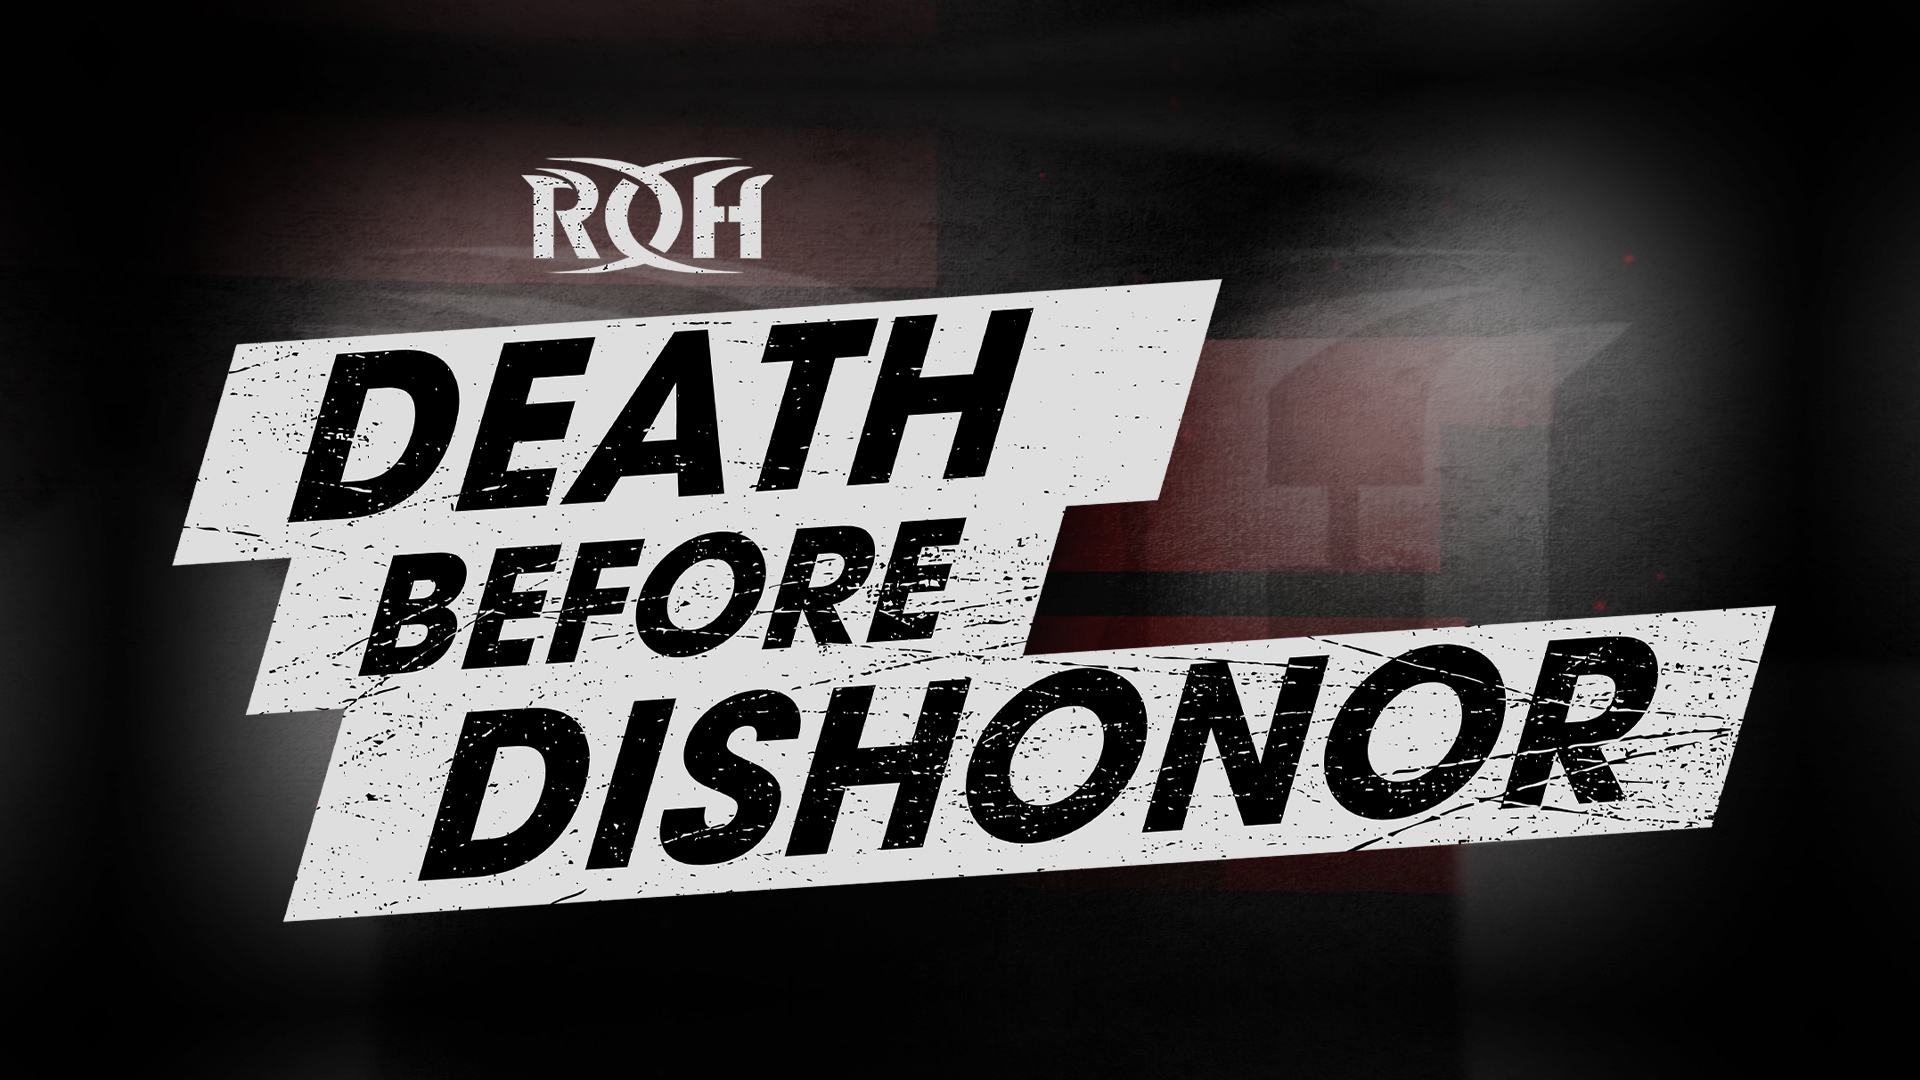 ROH Announces Death Before Dishonor 2021 Set For September